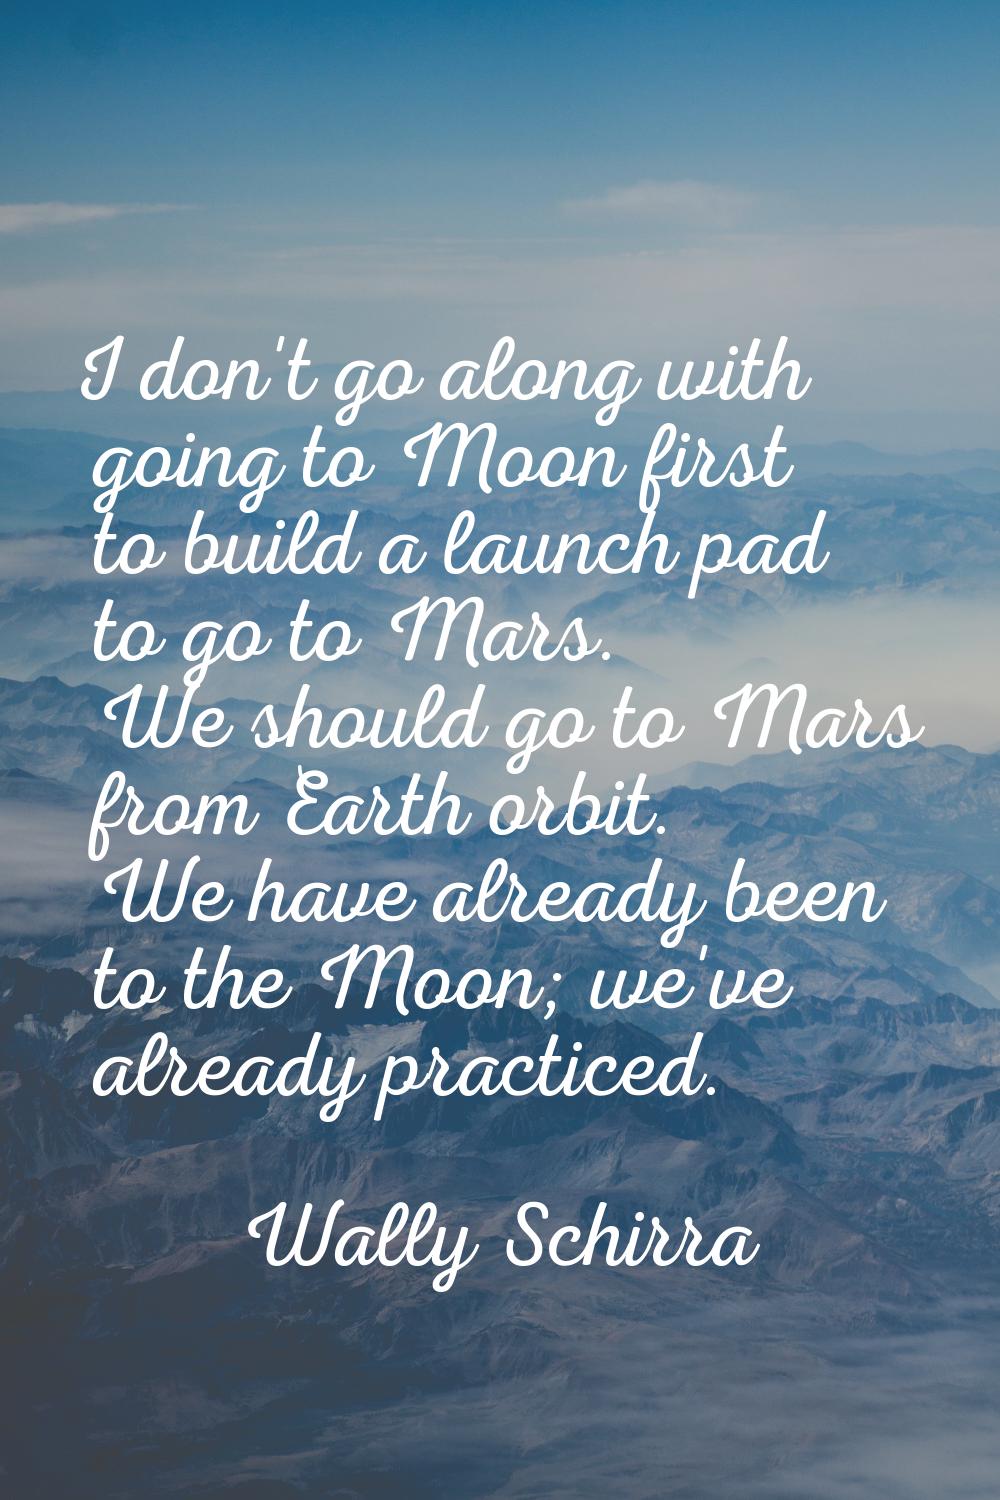 I don't go along with going to Moon first to build a launch pad to go to Mars. We should go to Mars